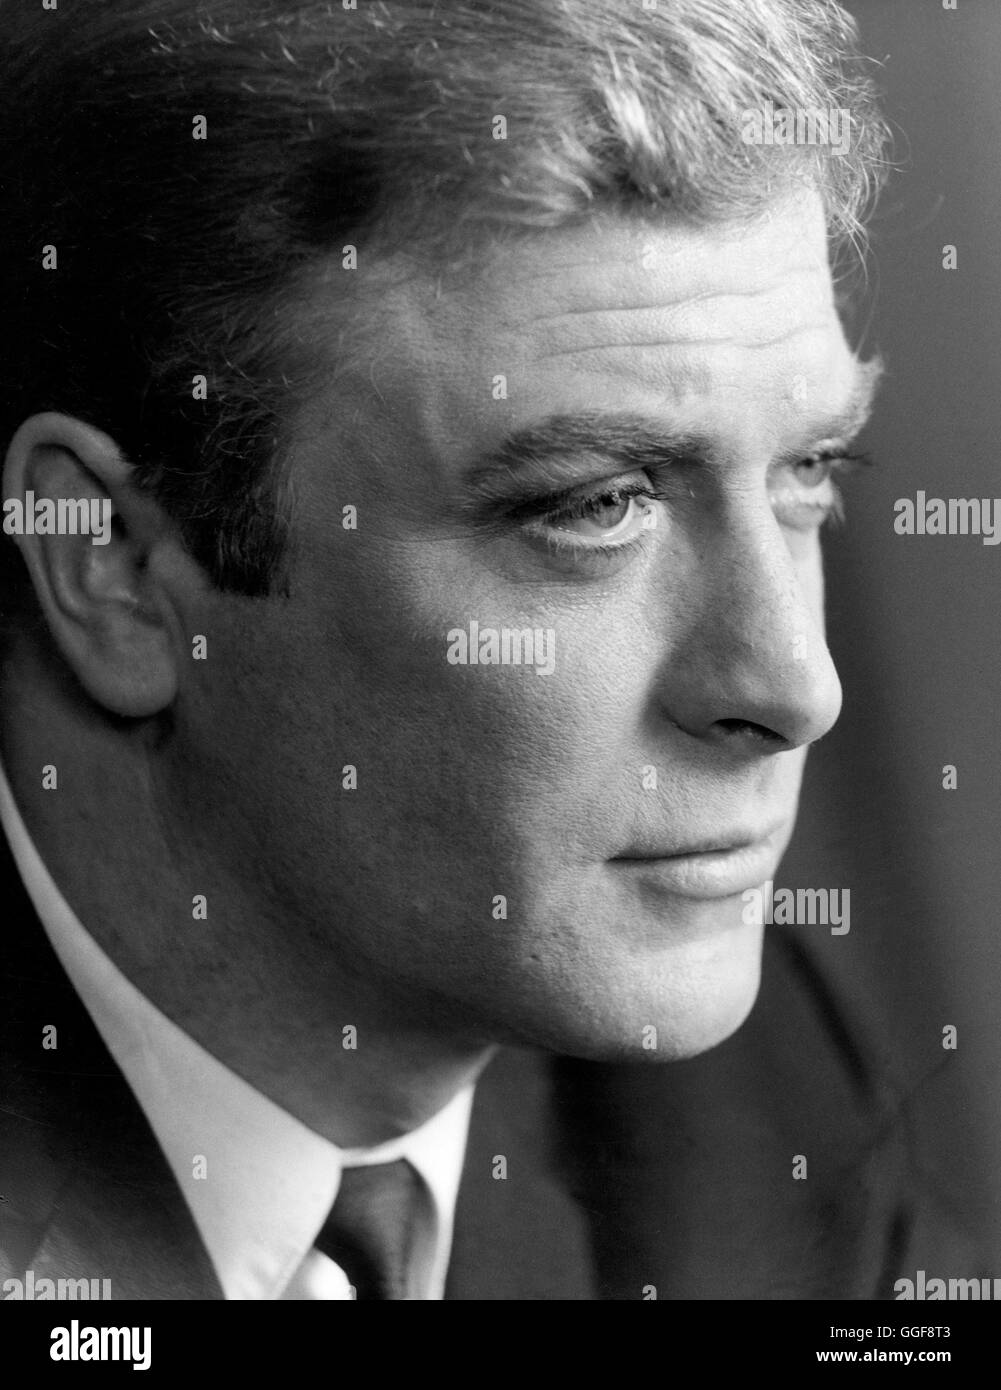 IPCRESS - STRENG GEHEIM / The Ipress File GB 1965 / Sidney J. Furie MICHAEL CAINE (Harry Palmer) in 'Ipcress - streng geheim', 1965.  Regie: Sidney J. Furie aka. The Ipress File Stock Photo